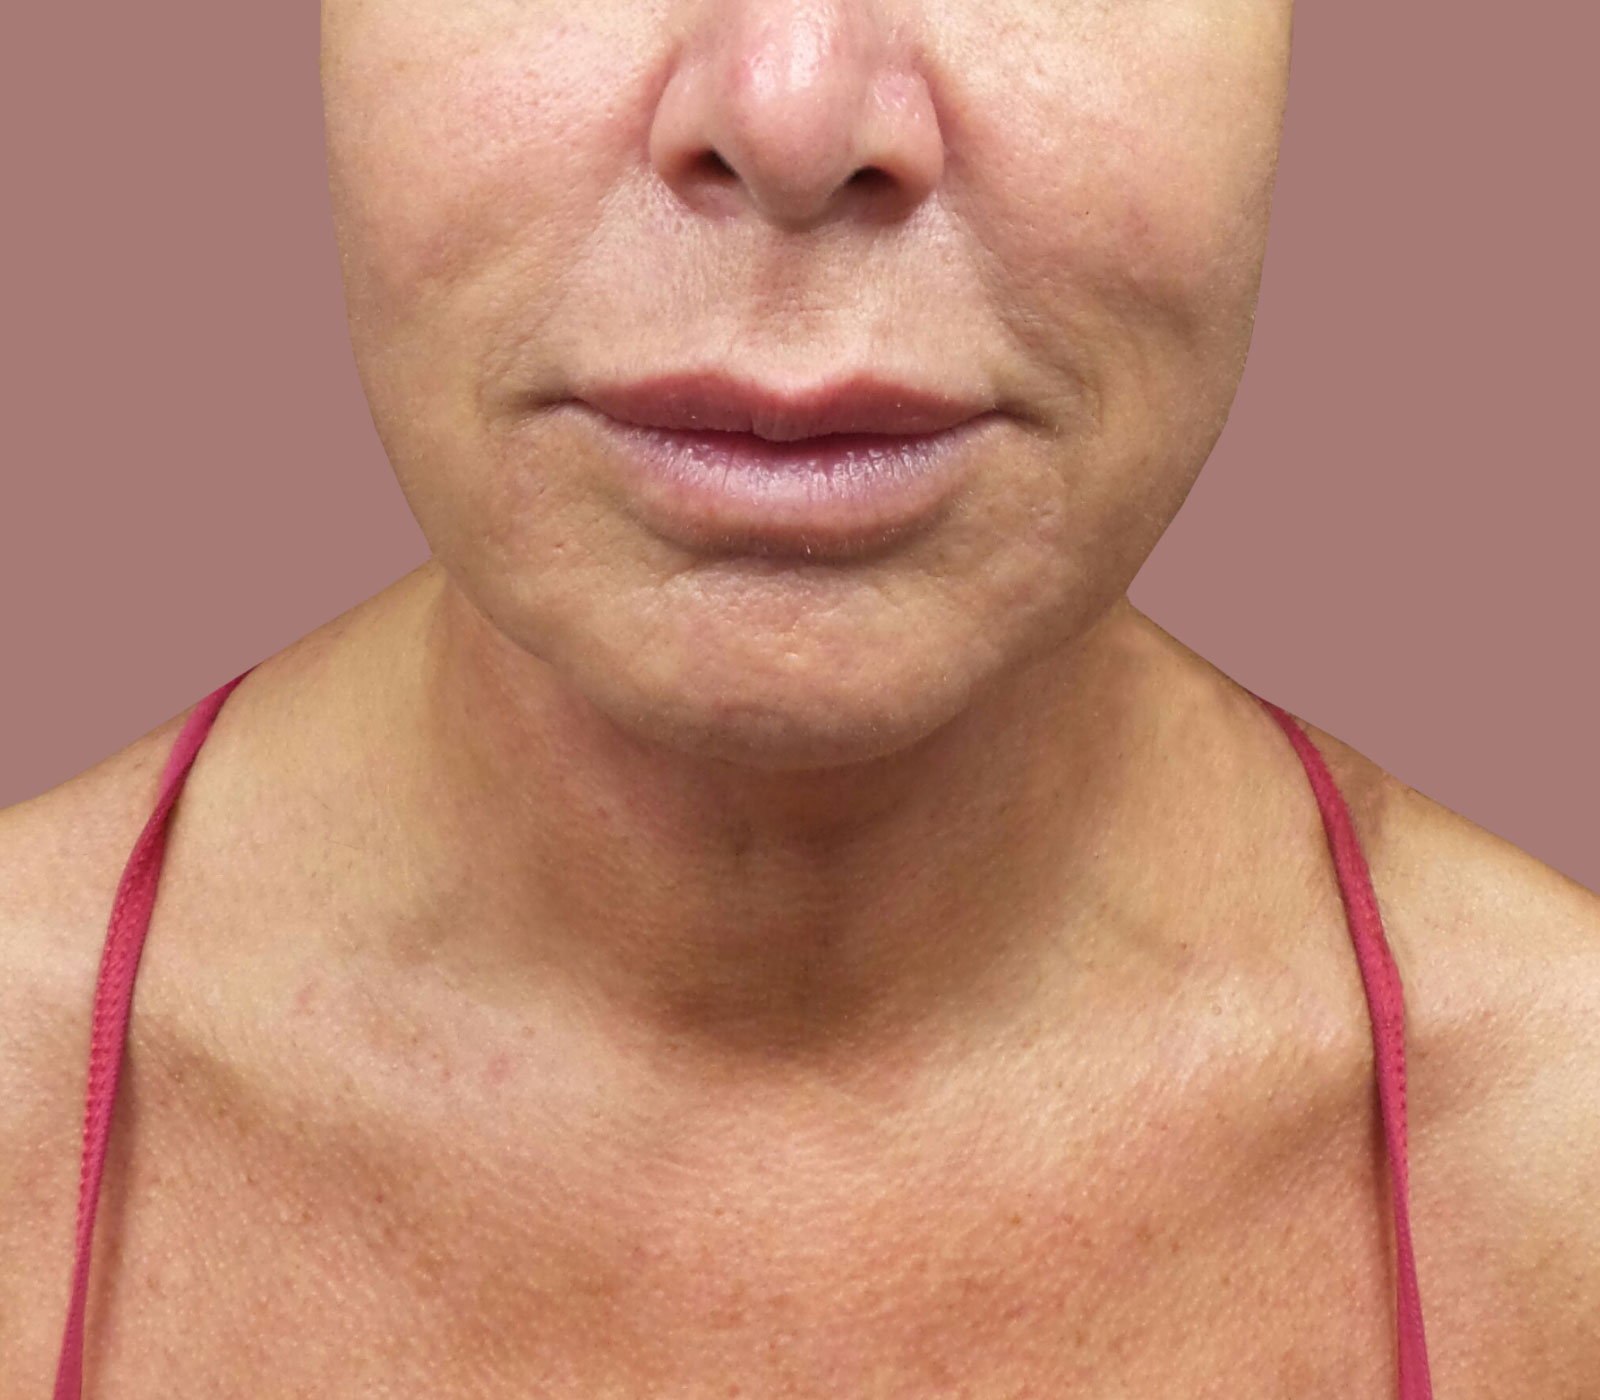 Facelift and Neck Lift near me